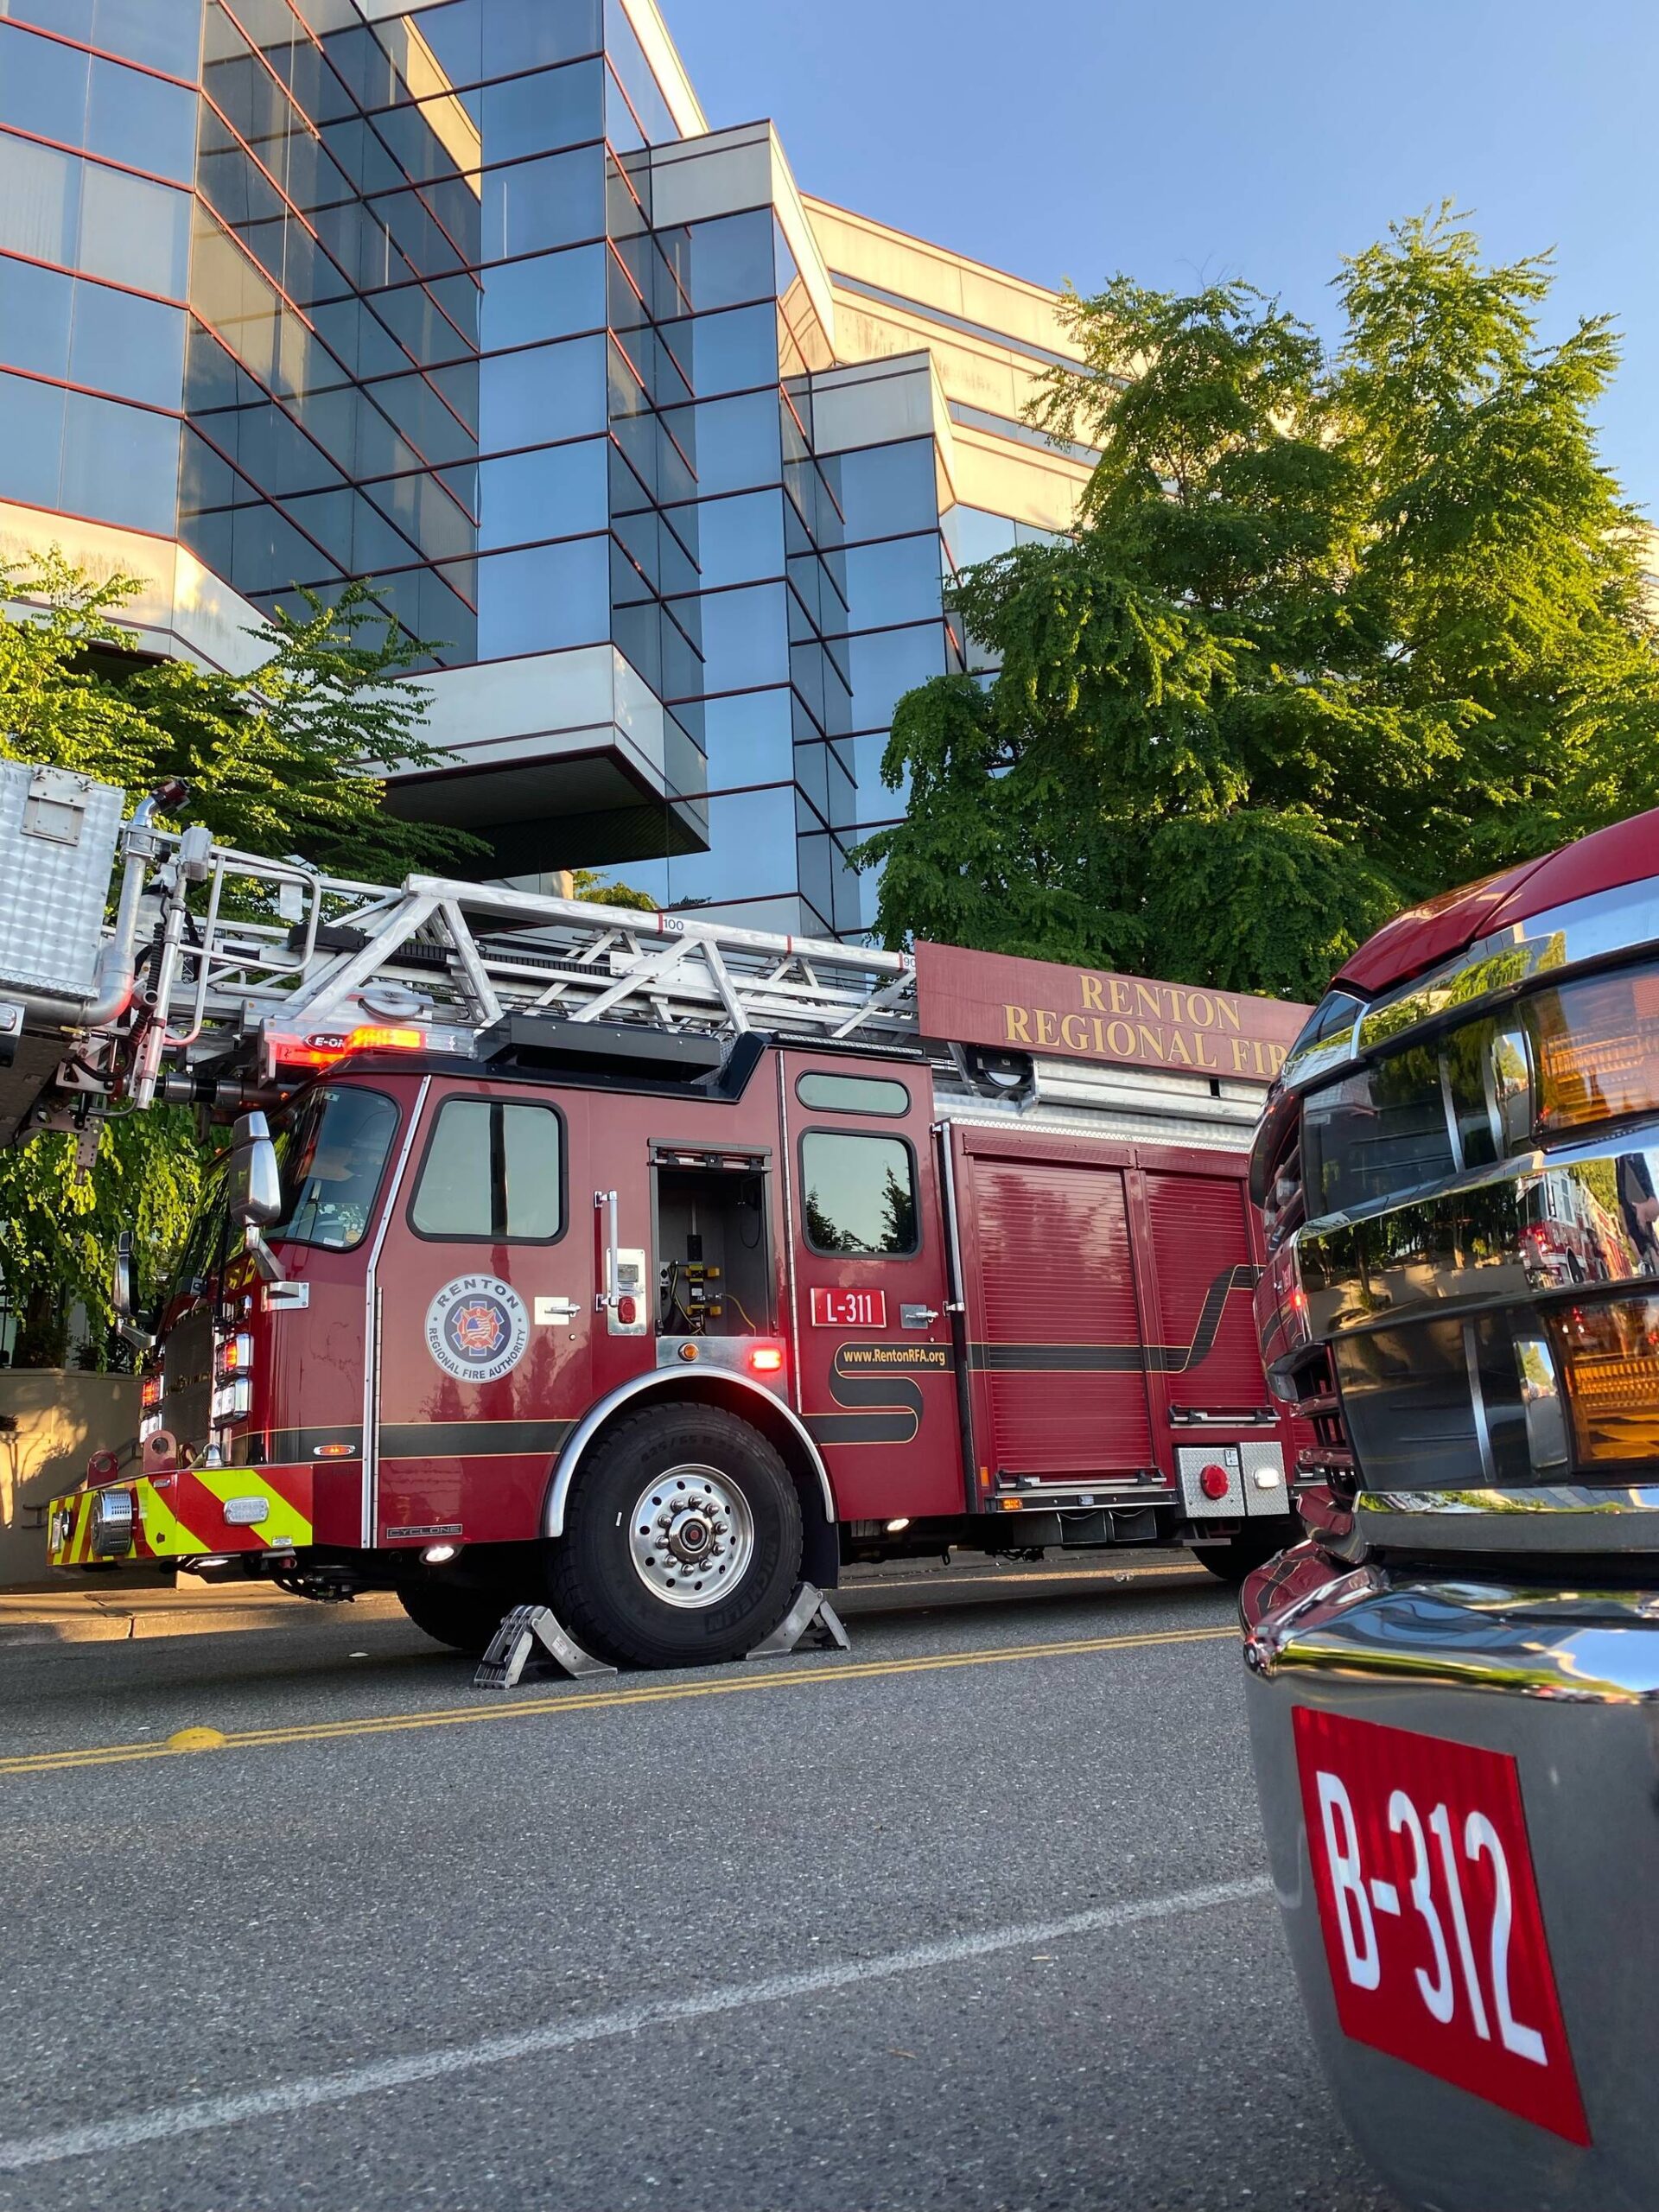 The fire was found on the first floor of the vacant Boeing building. Photo courtesy of Puget Sound Fire Authority.